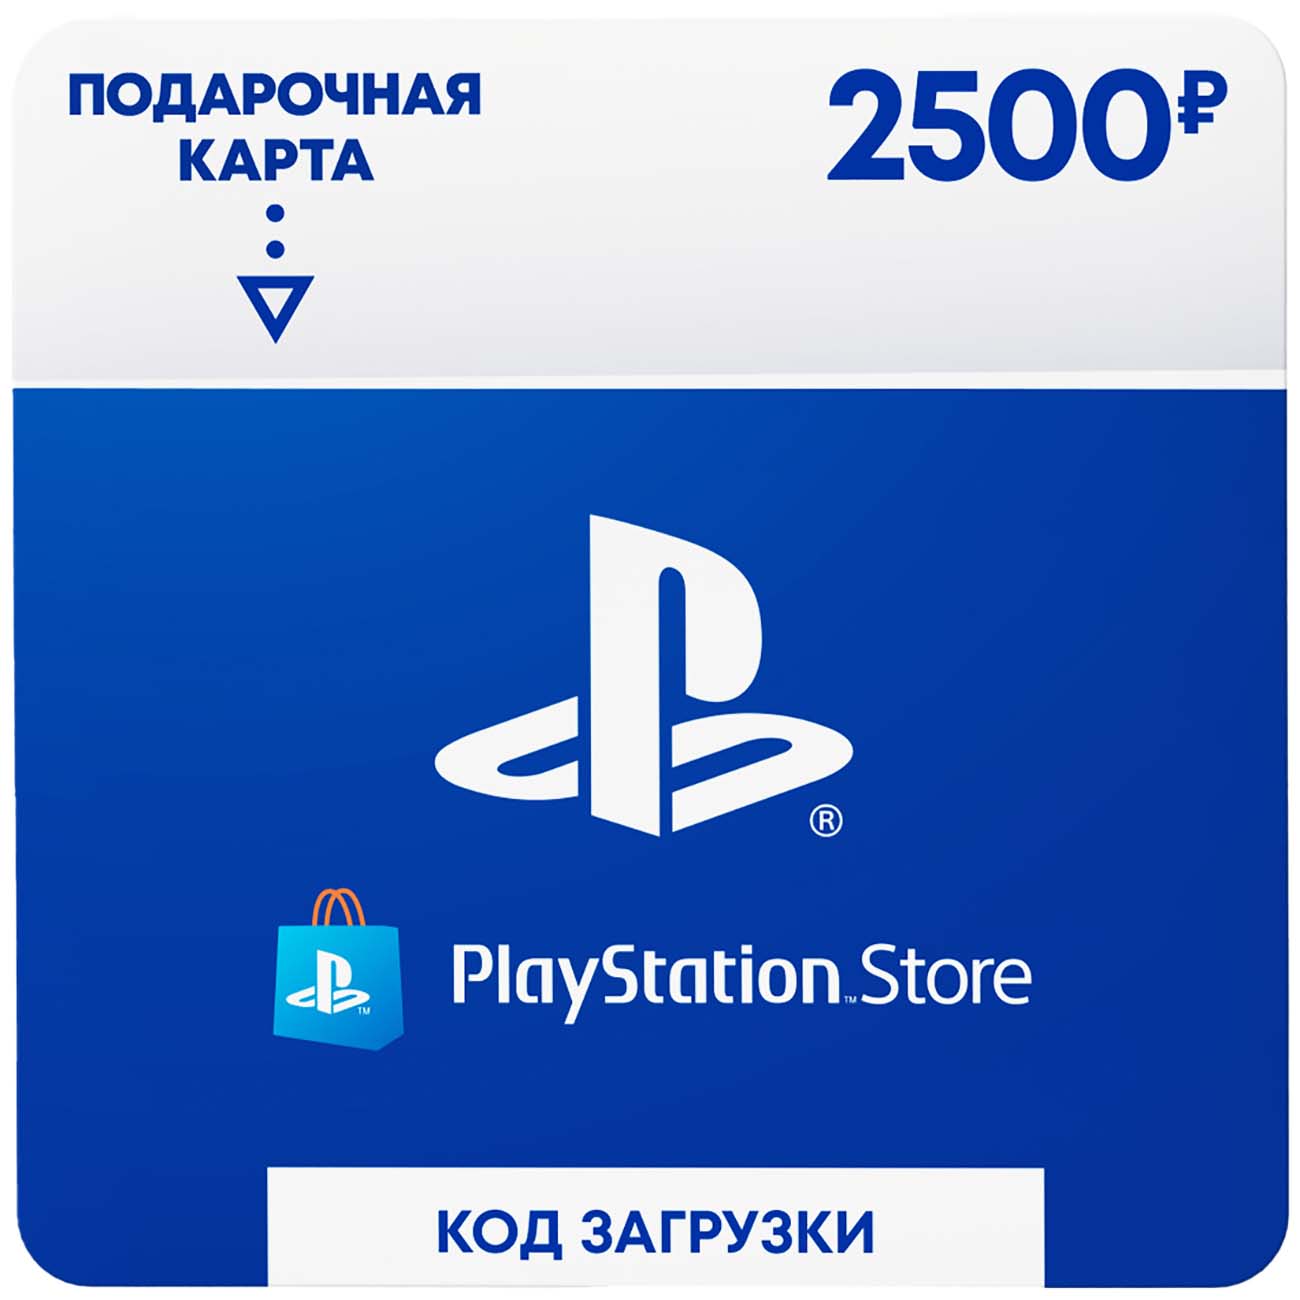 Payment card 2500 rubles PlayStation Network Store RUS